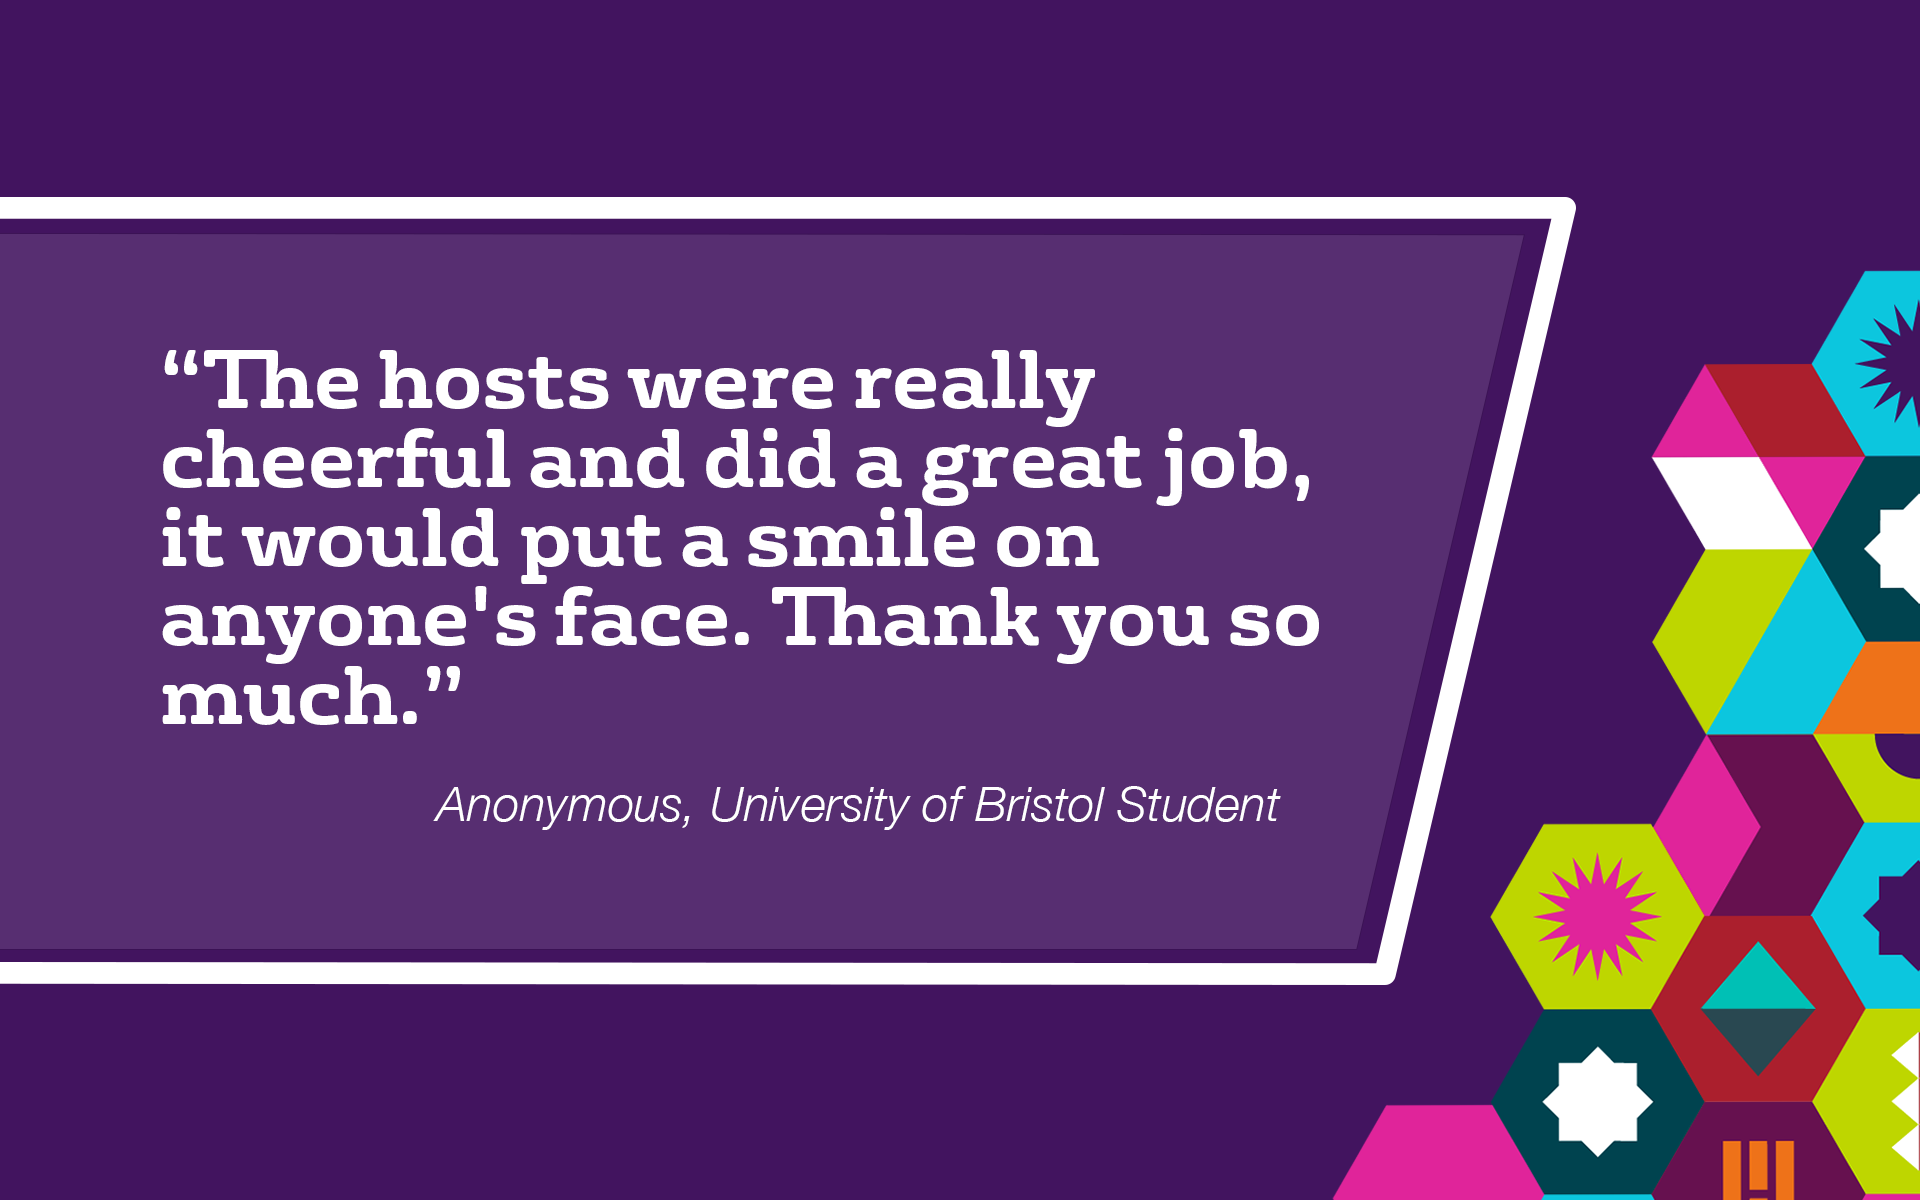 Quote from a University of Bristol student